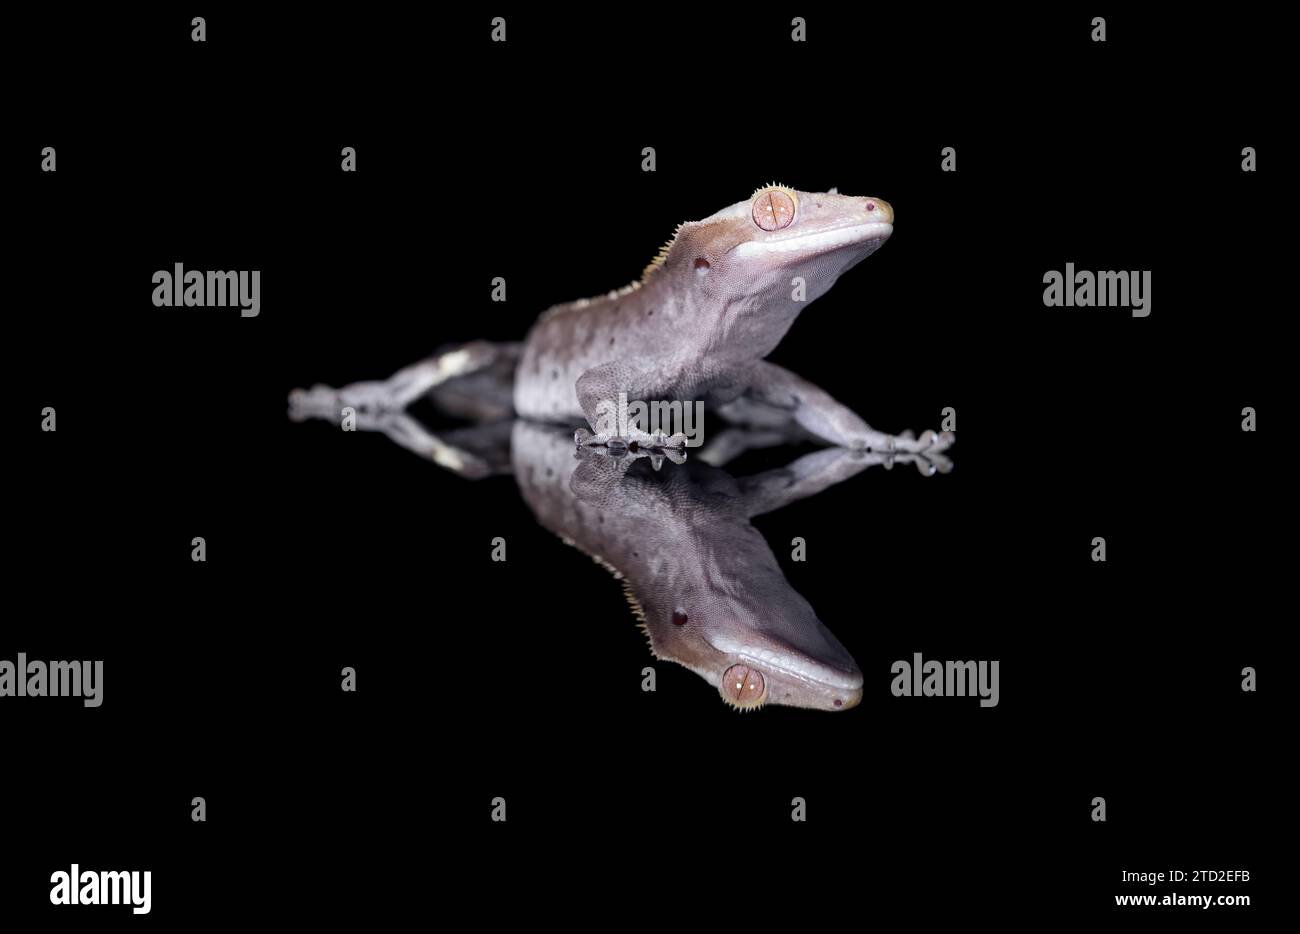 A New Caledonian Crested Gecko in reflection Stock Photo